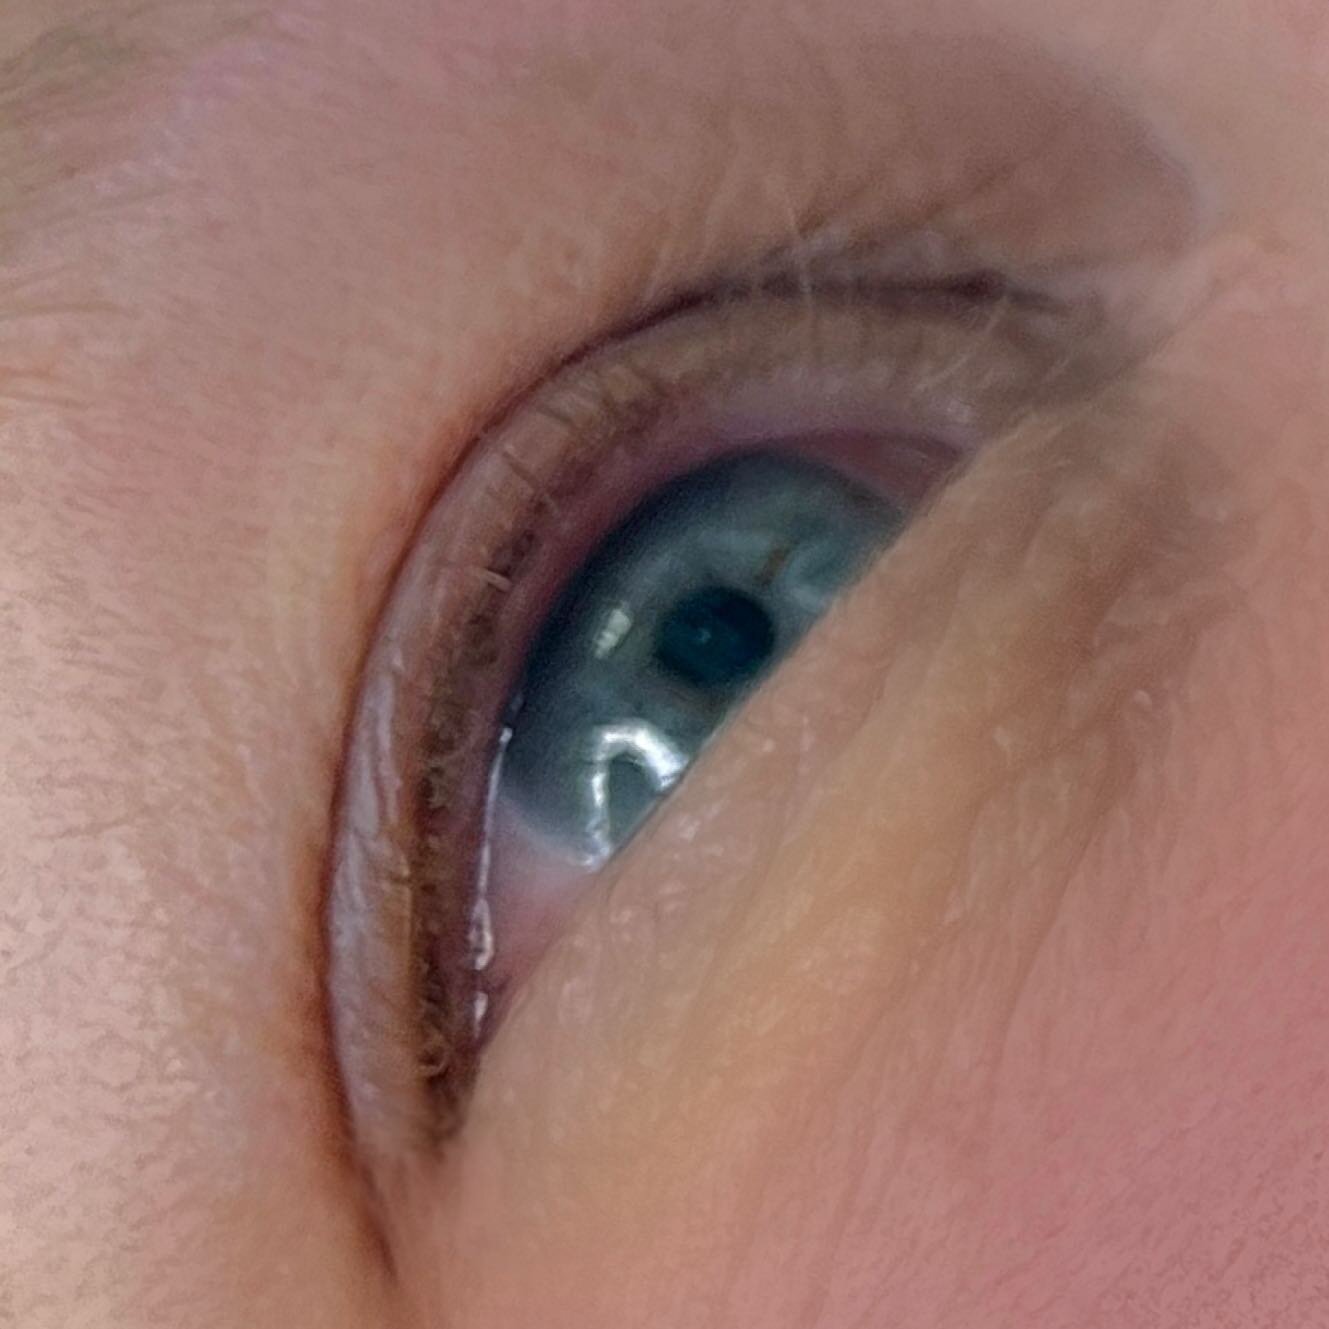 Depending on the shape, eyeliner doesn&rsquo;t always enhance the shape of your eye. My client wanted eyeliner but we went with a subtle lash line enhancement instead. It&rsquo;s amazing how small changes can make BIG differences. 

You can book with